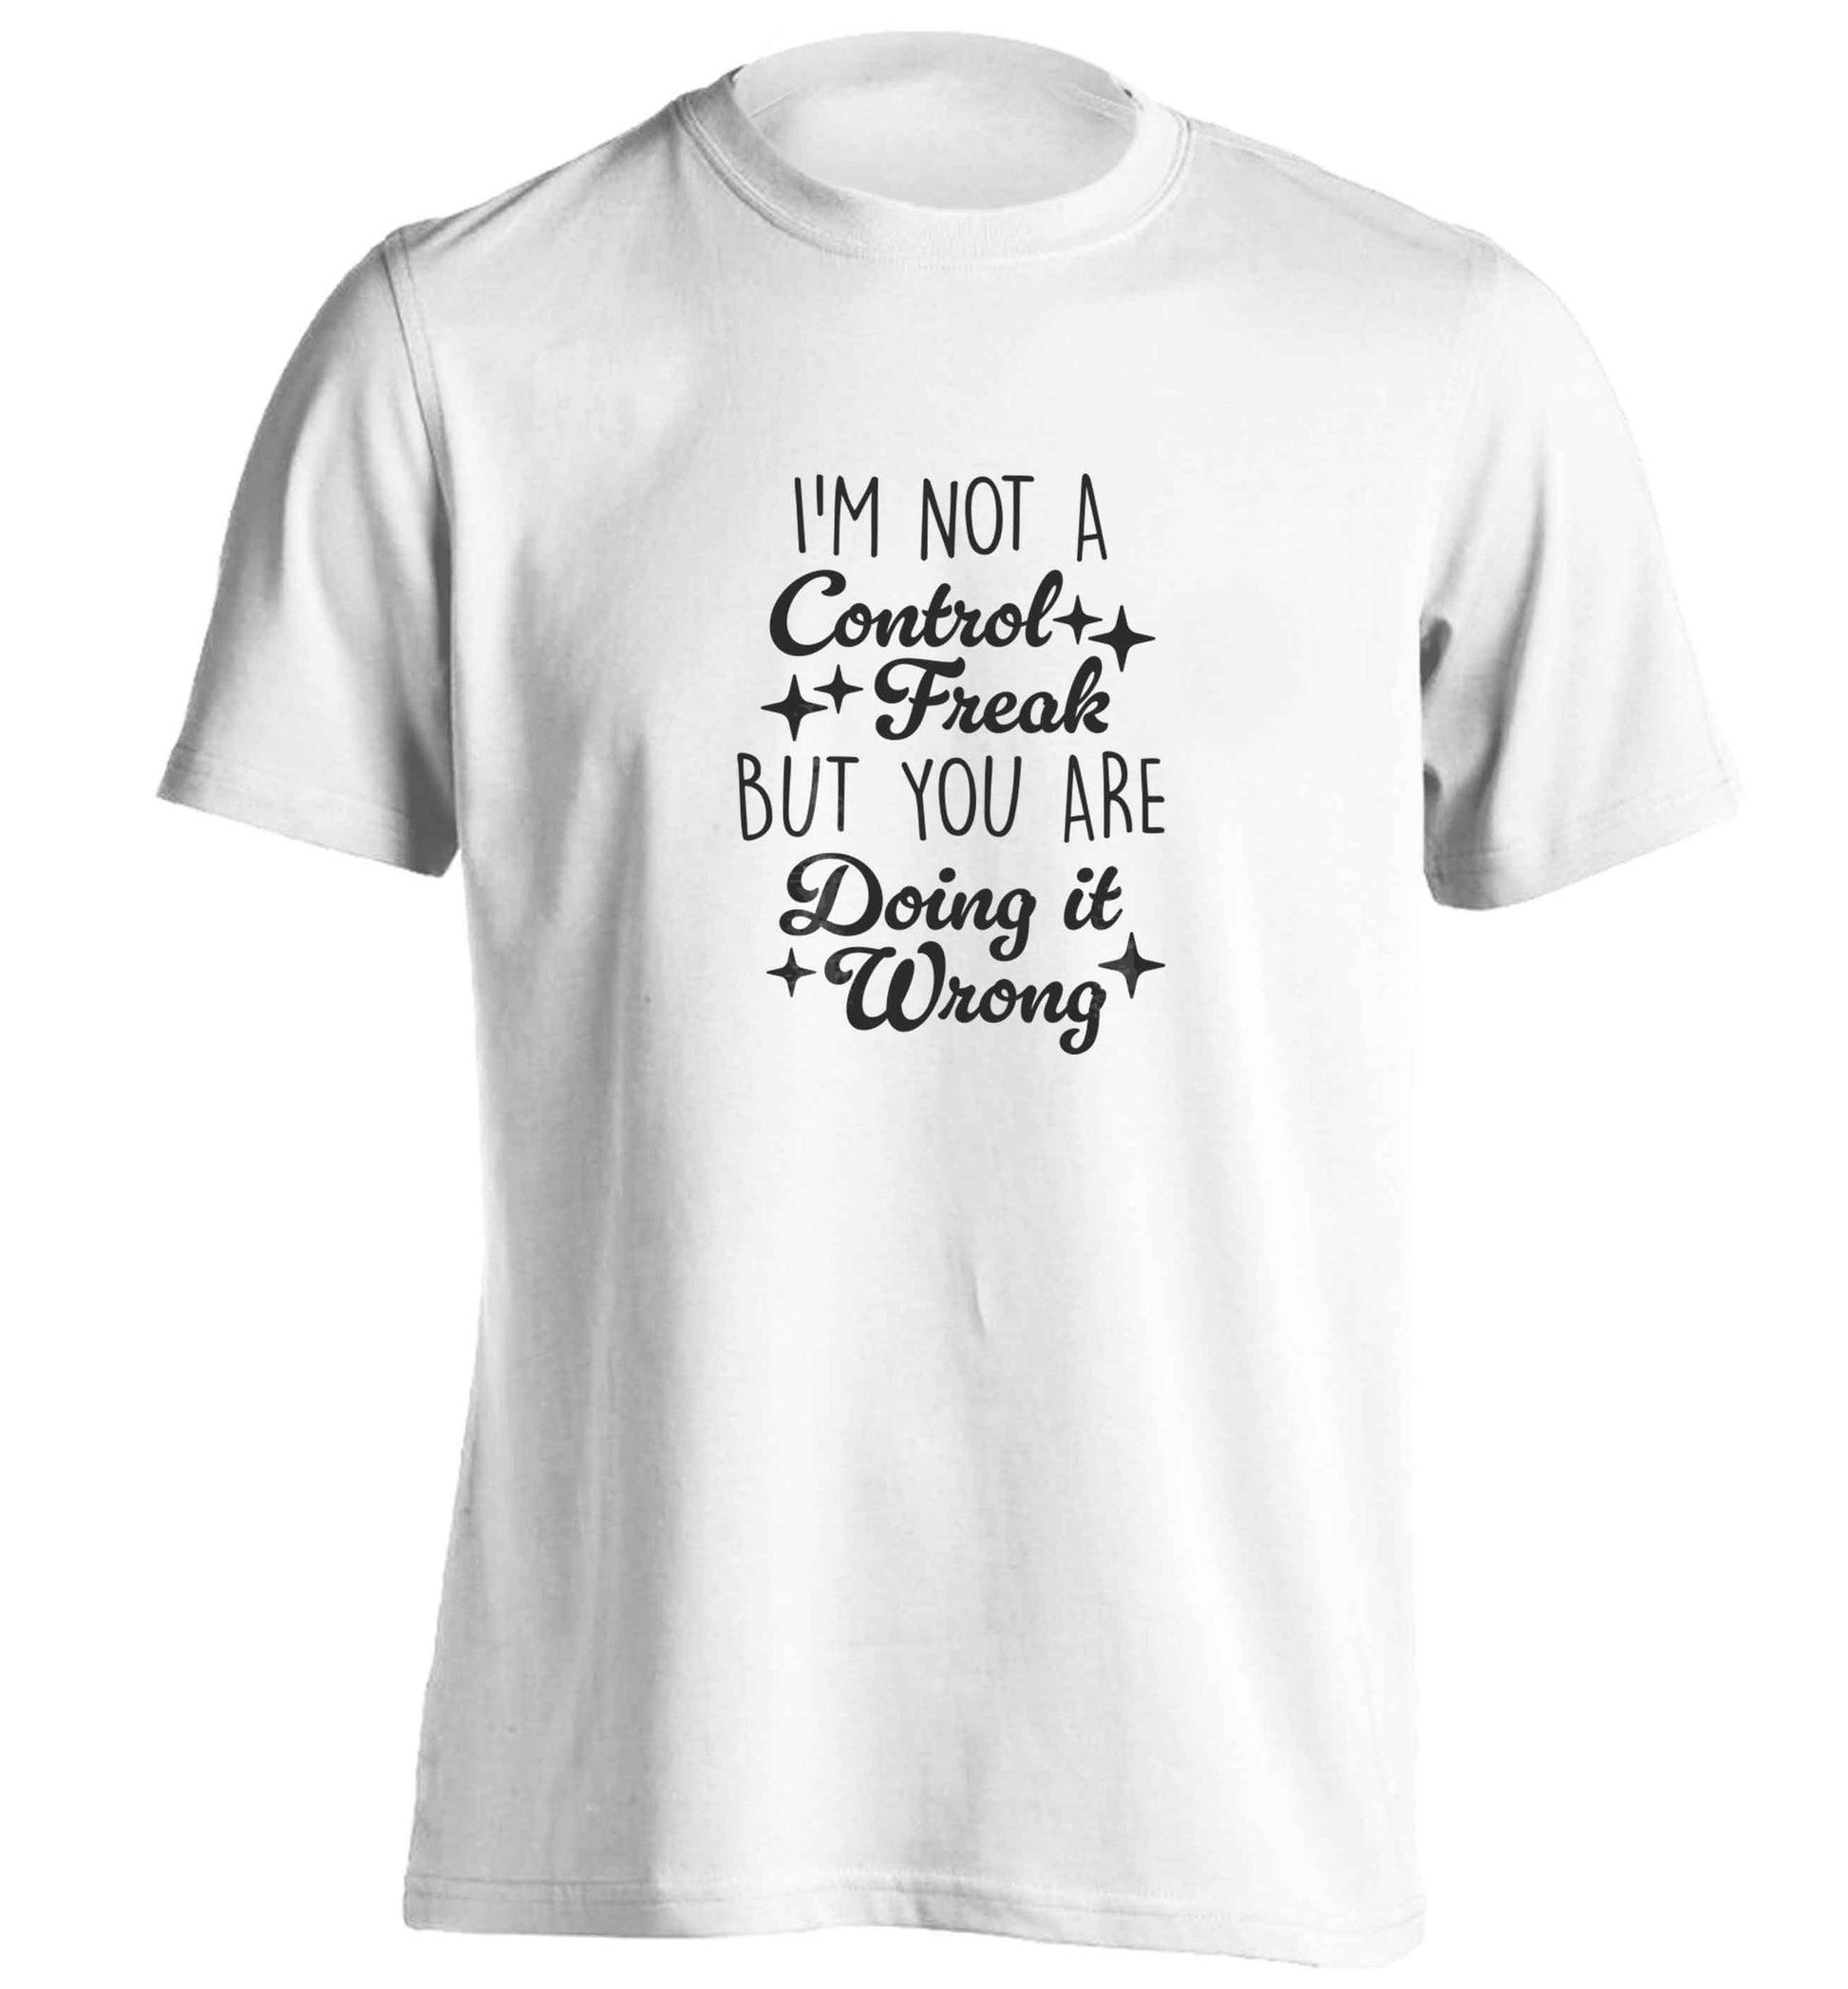 I'm not a control freak but you are doing it wrong adults unisex white Tshirt 2XL